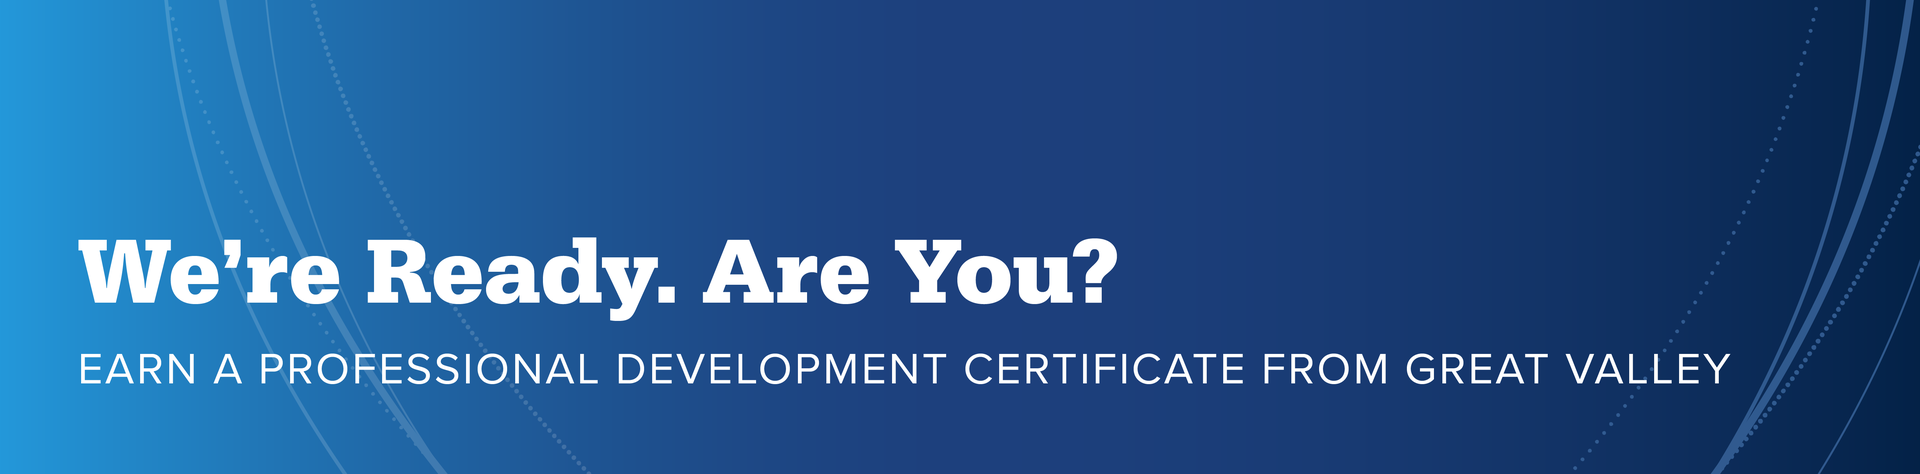 Header with Text "We're Ready. Are You? Earn a Professional Development Certificate from Great Valley